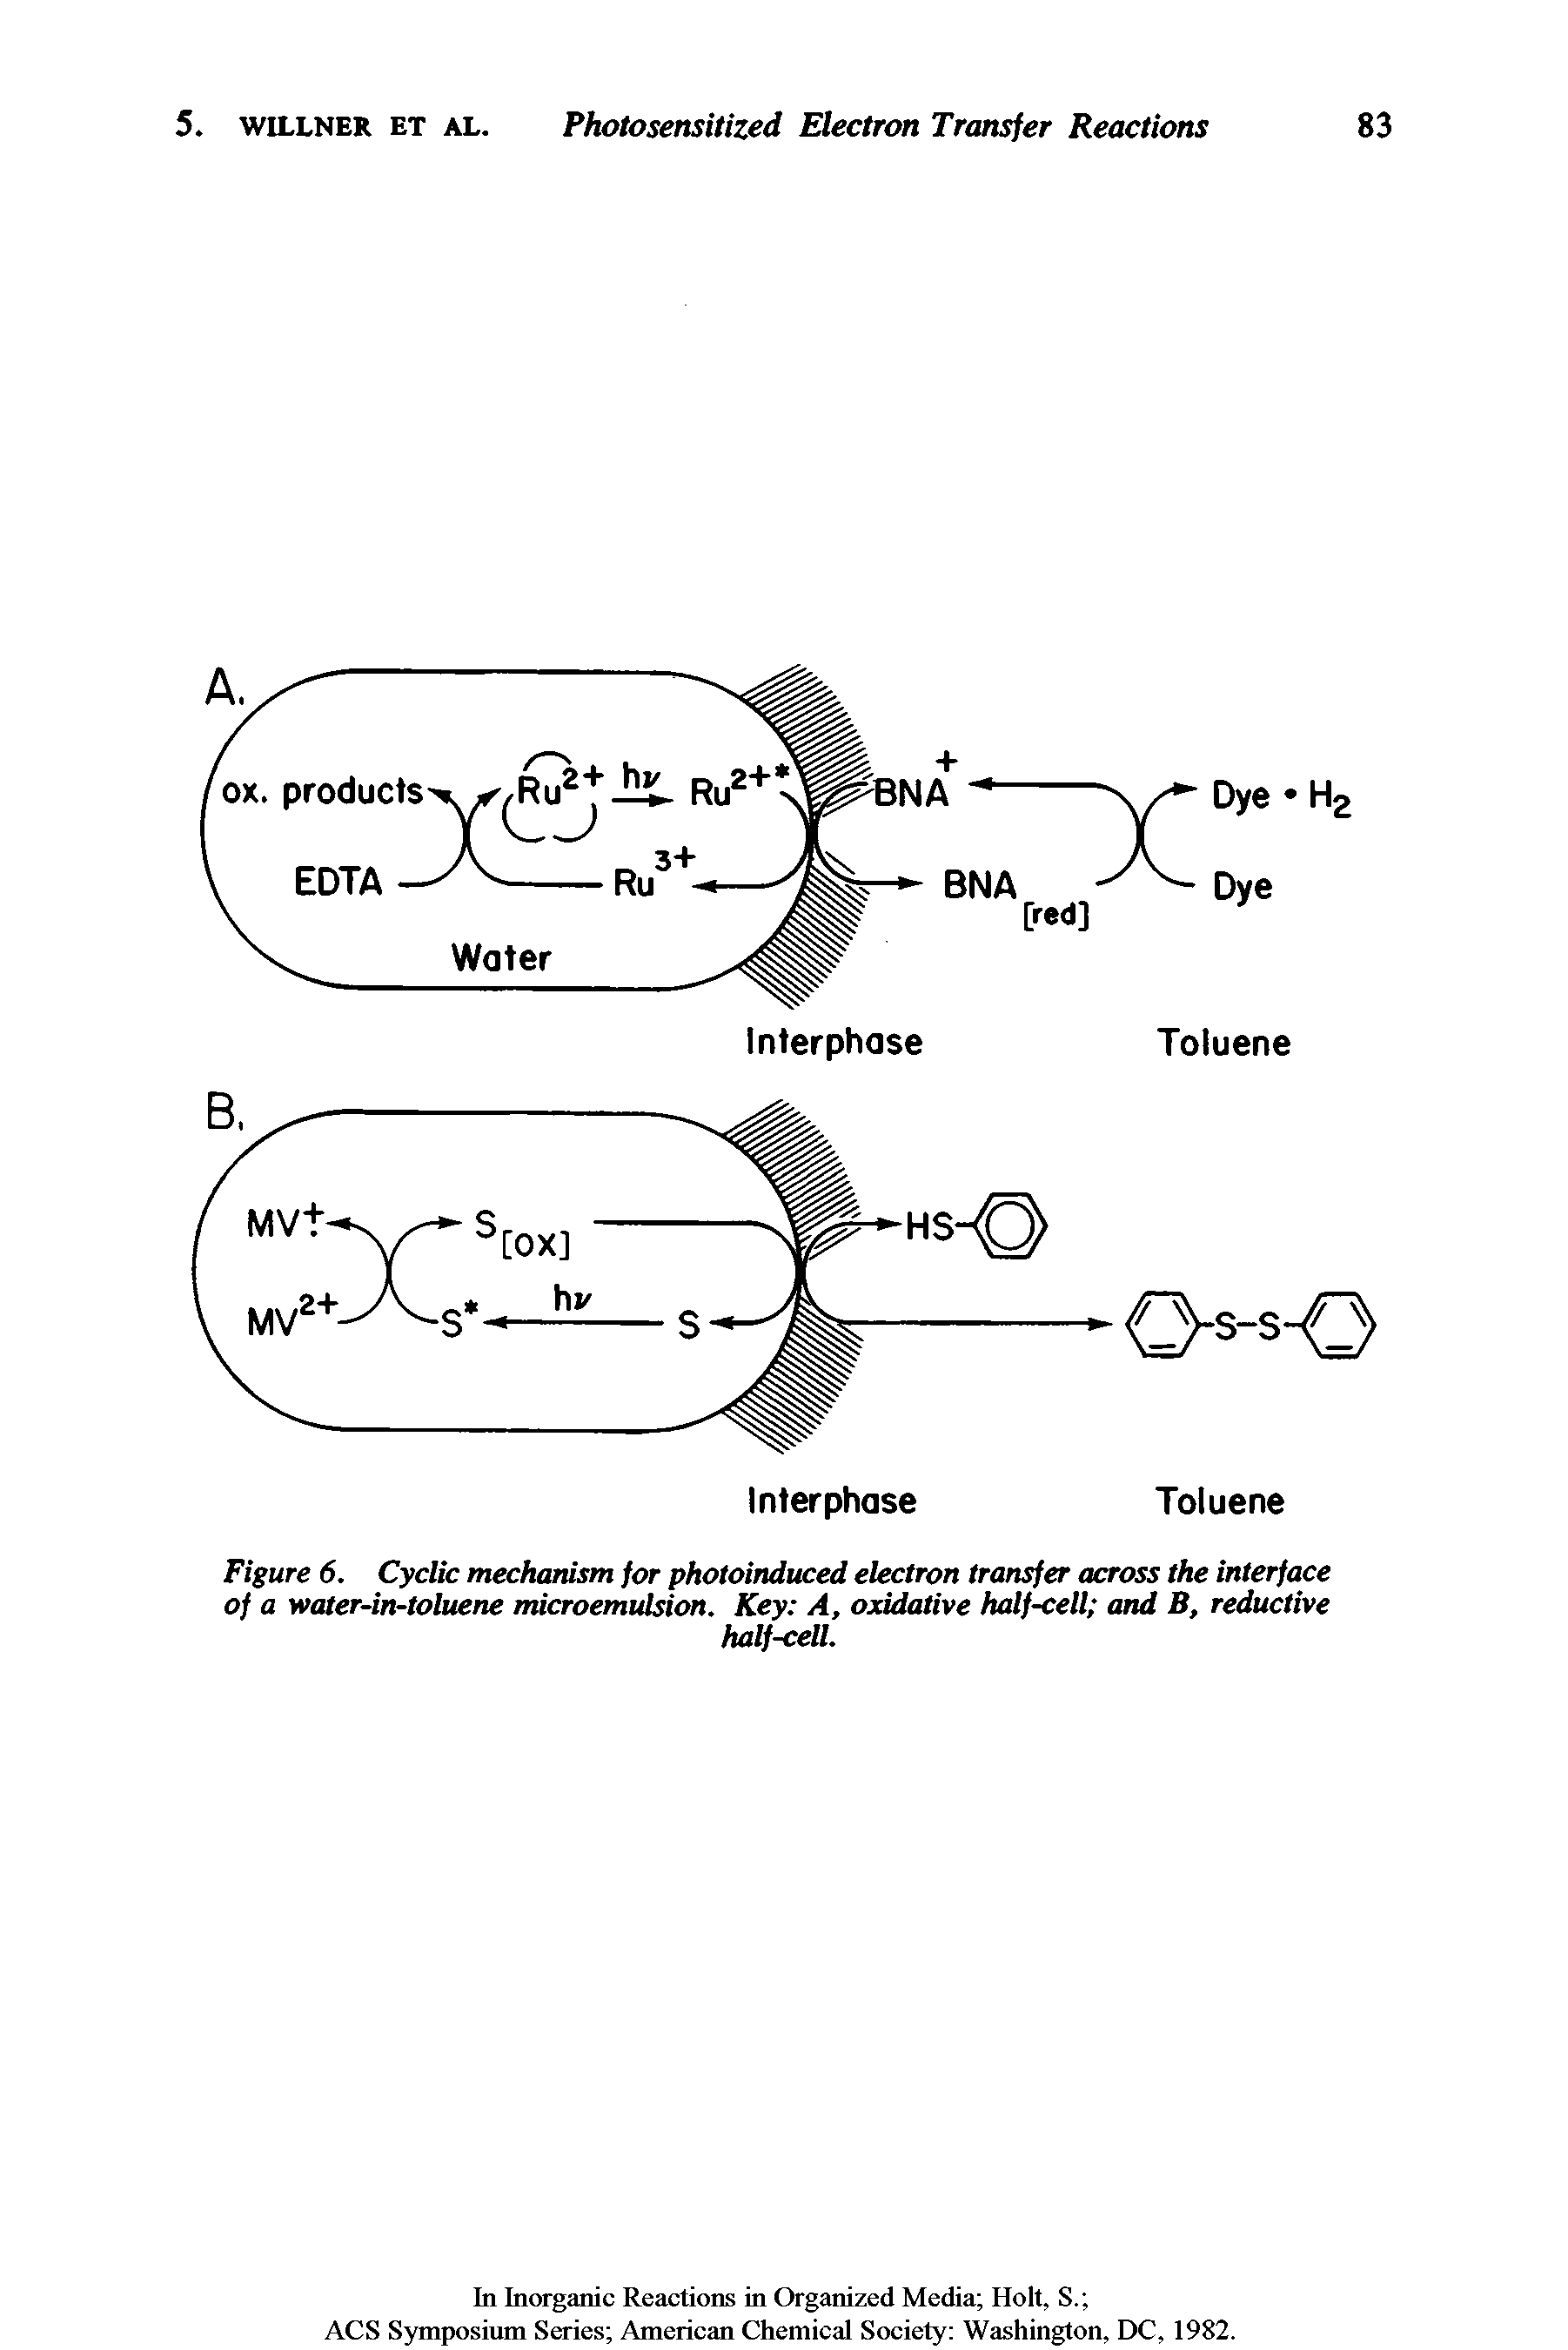 Figure 6. Cyclic mechanism for photoinduced electron transfer across the interface of a water-in-toluene microemulsion. Key A, oxidative half-cell and B, reductive...